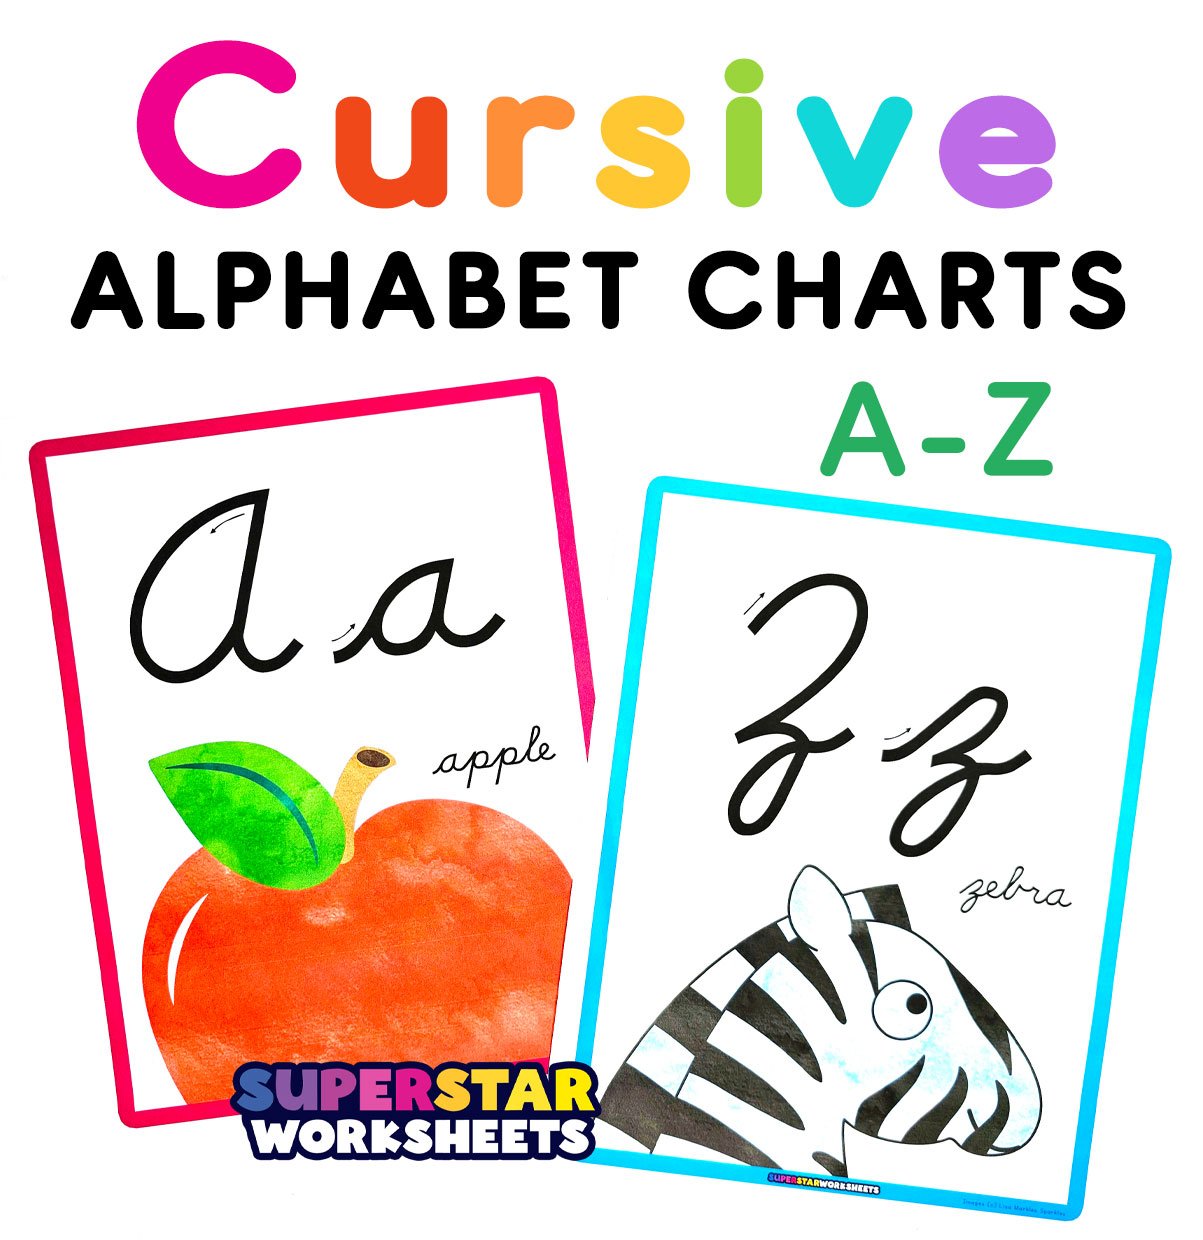 Look and Match the Correct Cursive Letter worksheet